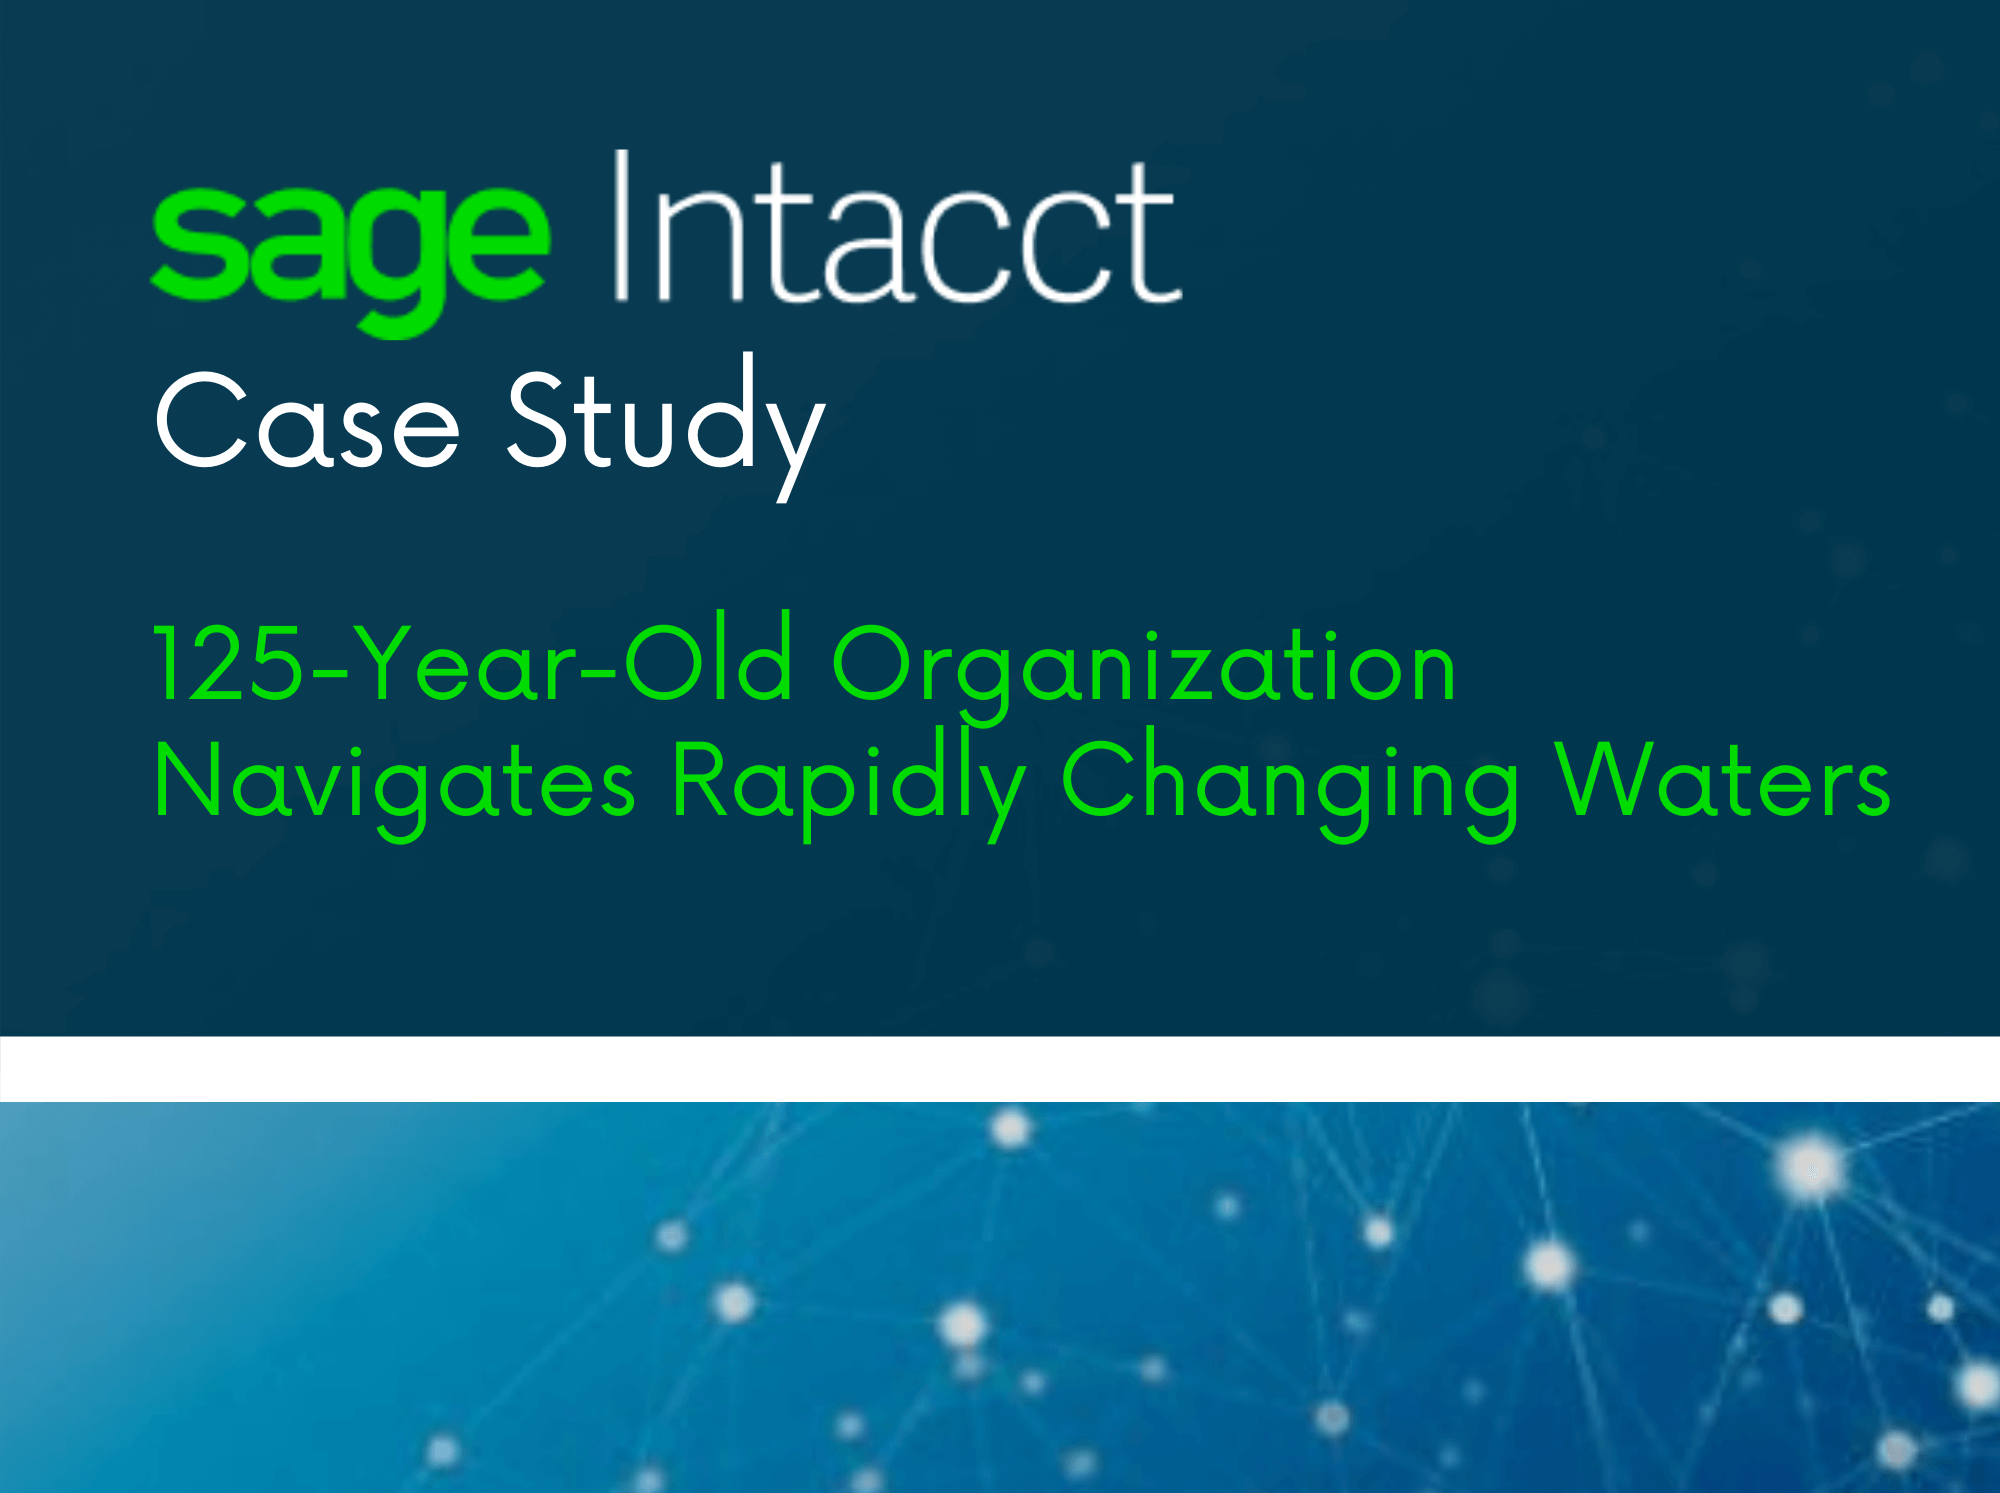 Sage Intacct: Case Study – 125-Year-Old Organization Navigates Rapidly Changing Waters